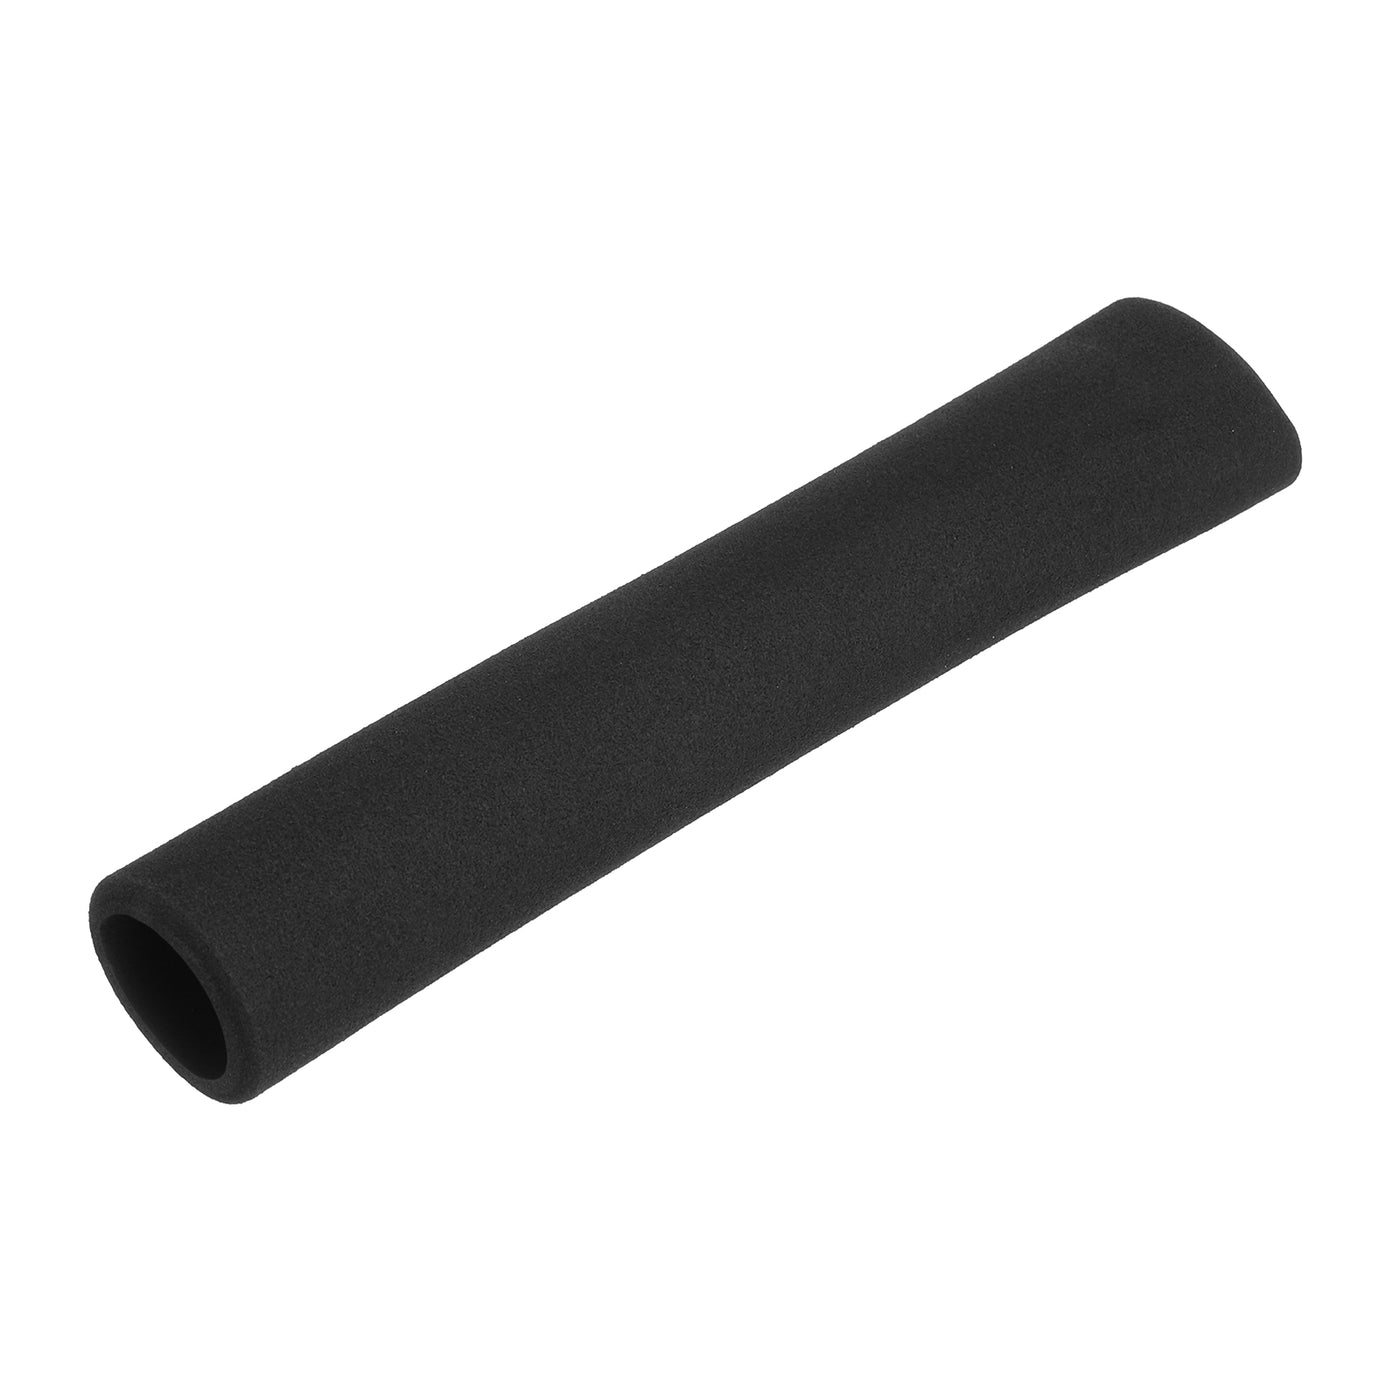 uxcell Uxcell Pipe Insulation Tube Foam Tubing for Handle Grip Support 25mm ID 35mm OD 195mm Heat Preservation Black